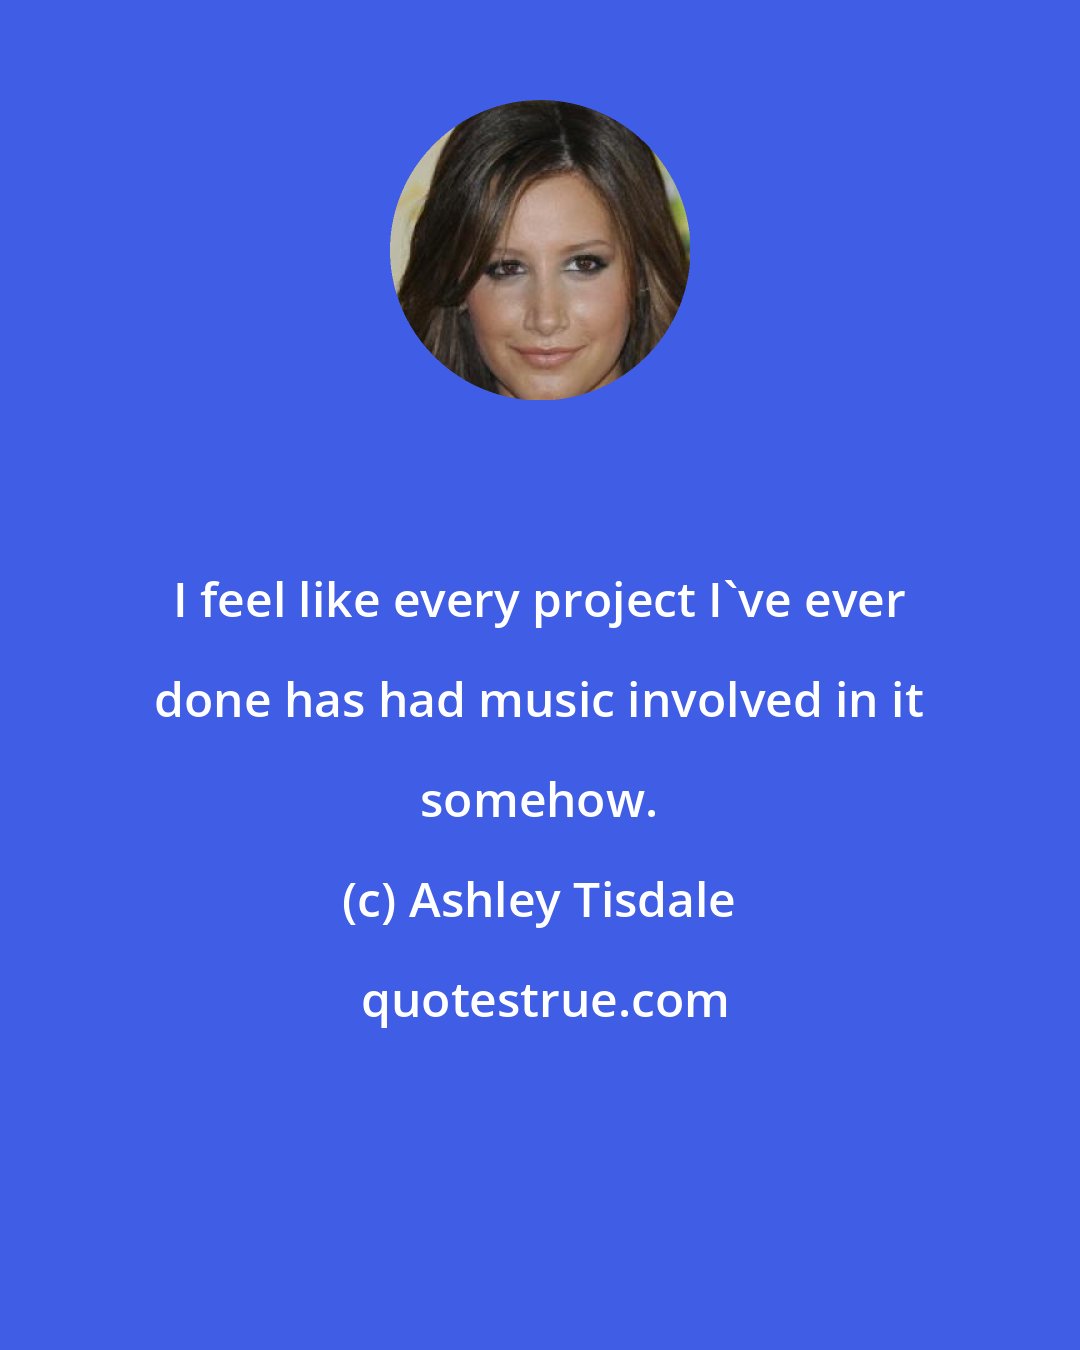 Ashley Tisdale: I feel like every project I've ever done has had music involved in it somehow.